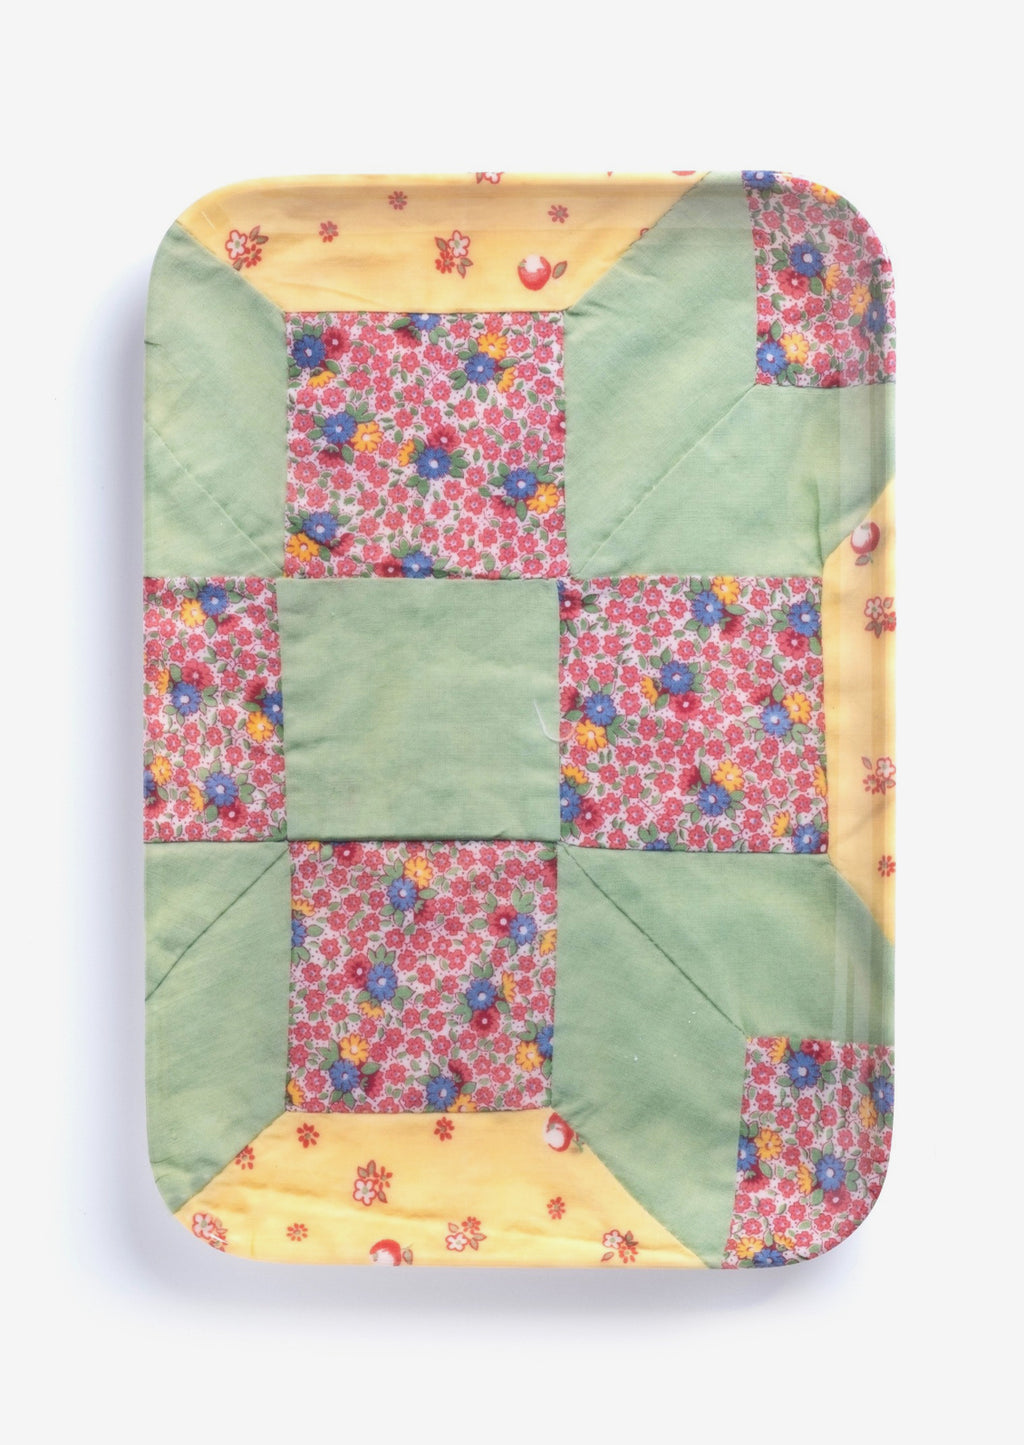 Large / Quilt Multi: A patterned melamine tray in quilt pattern.